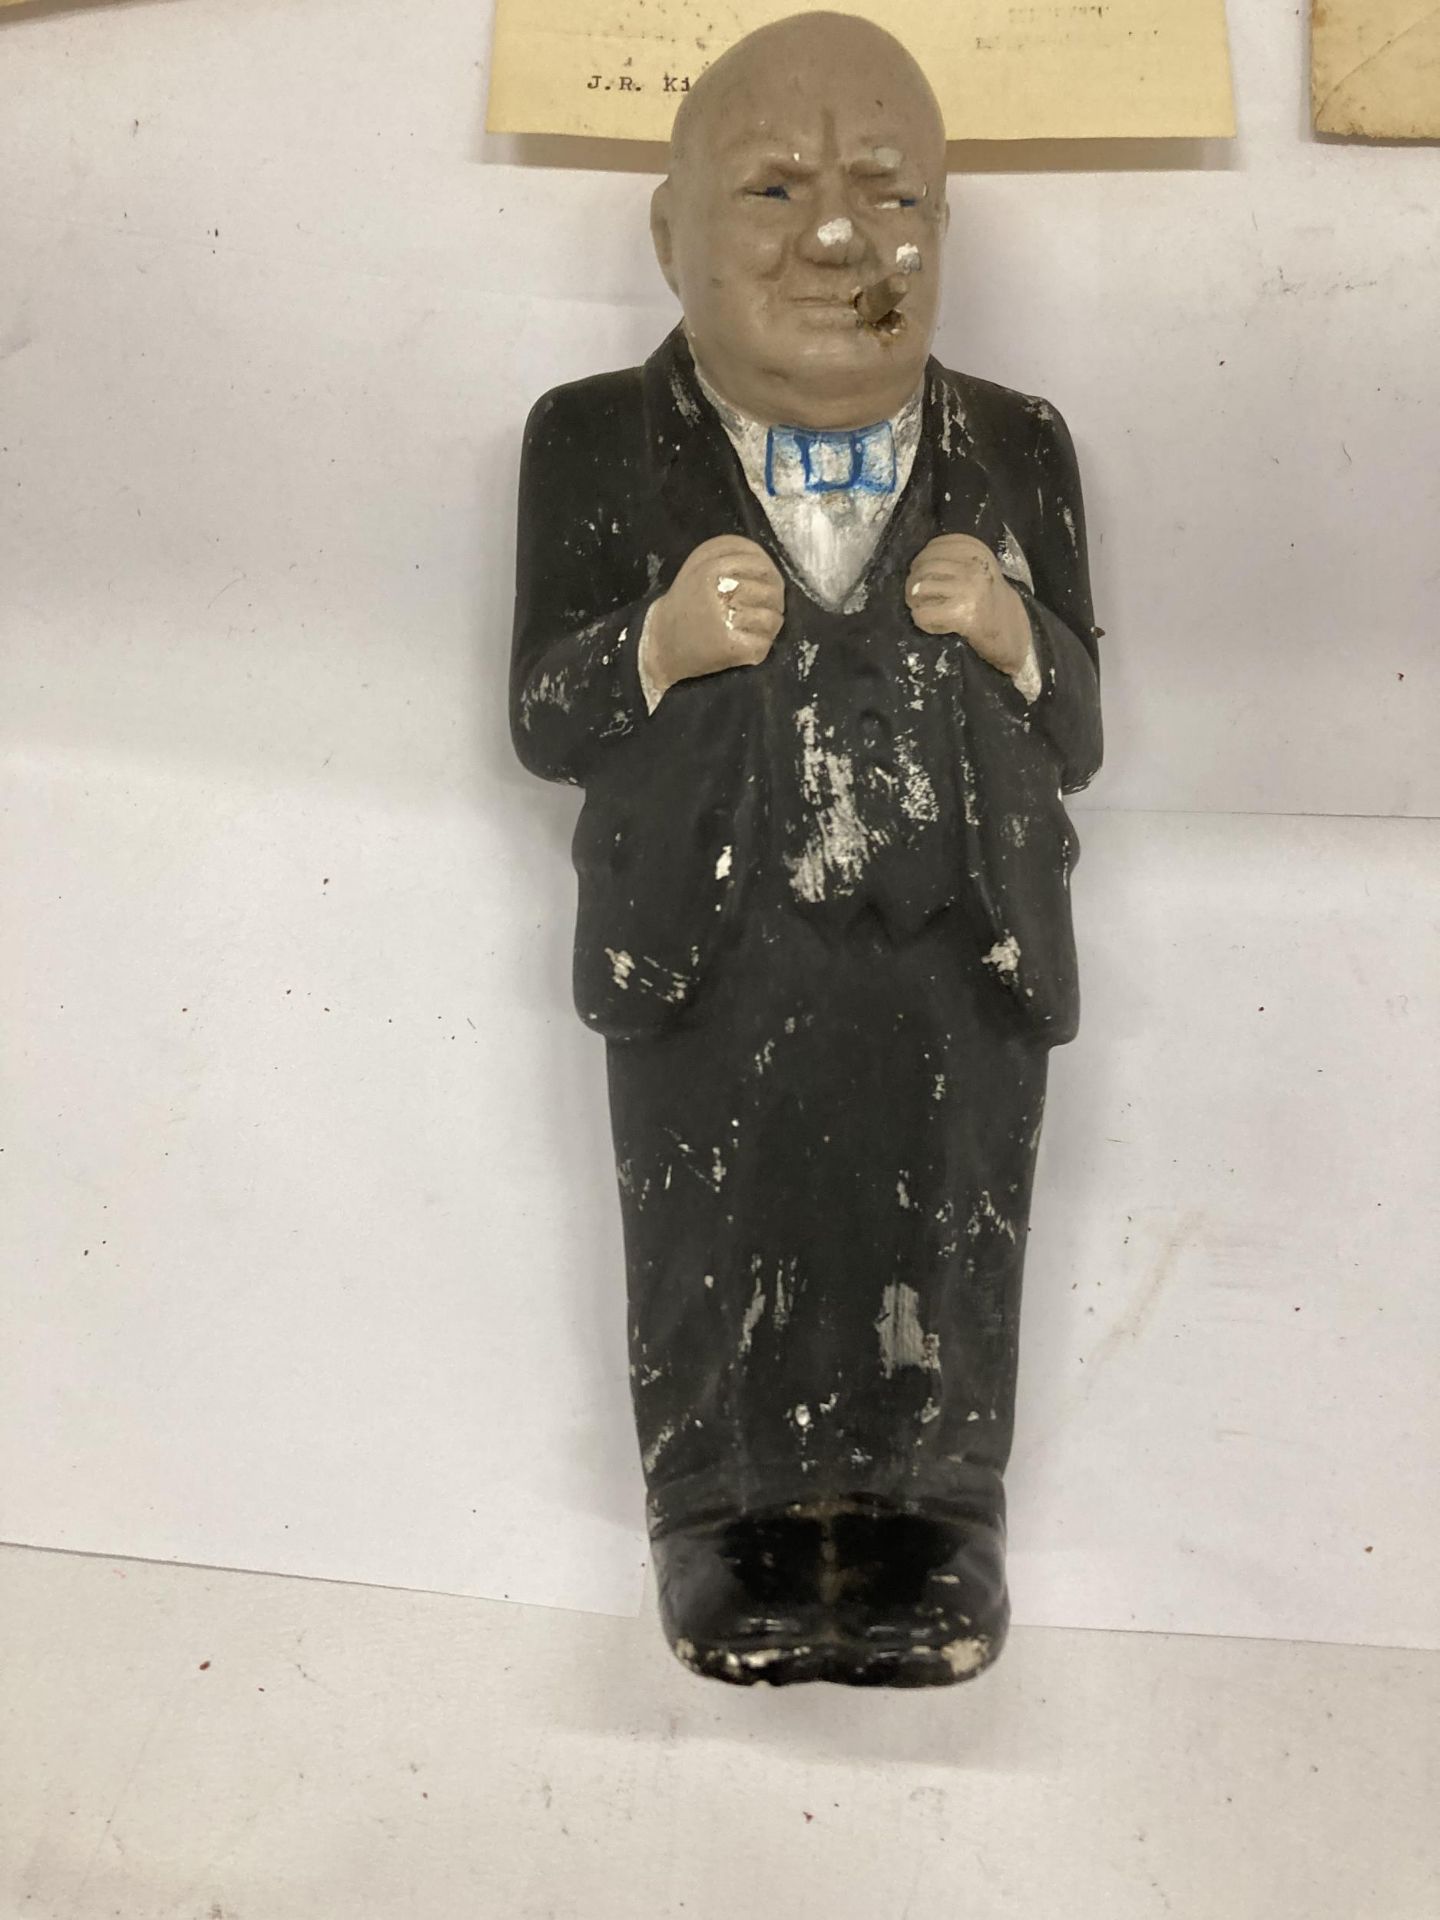 A FIGURE OF WINSTON CHURCHILL WITH DOWNING ST LETTERS - Image 2 of 8